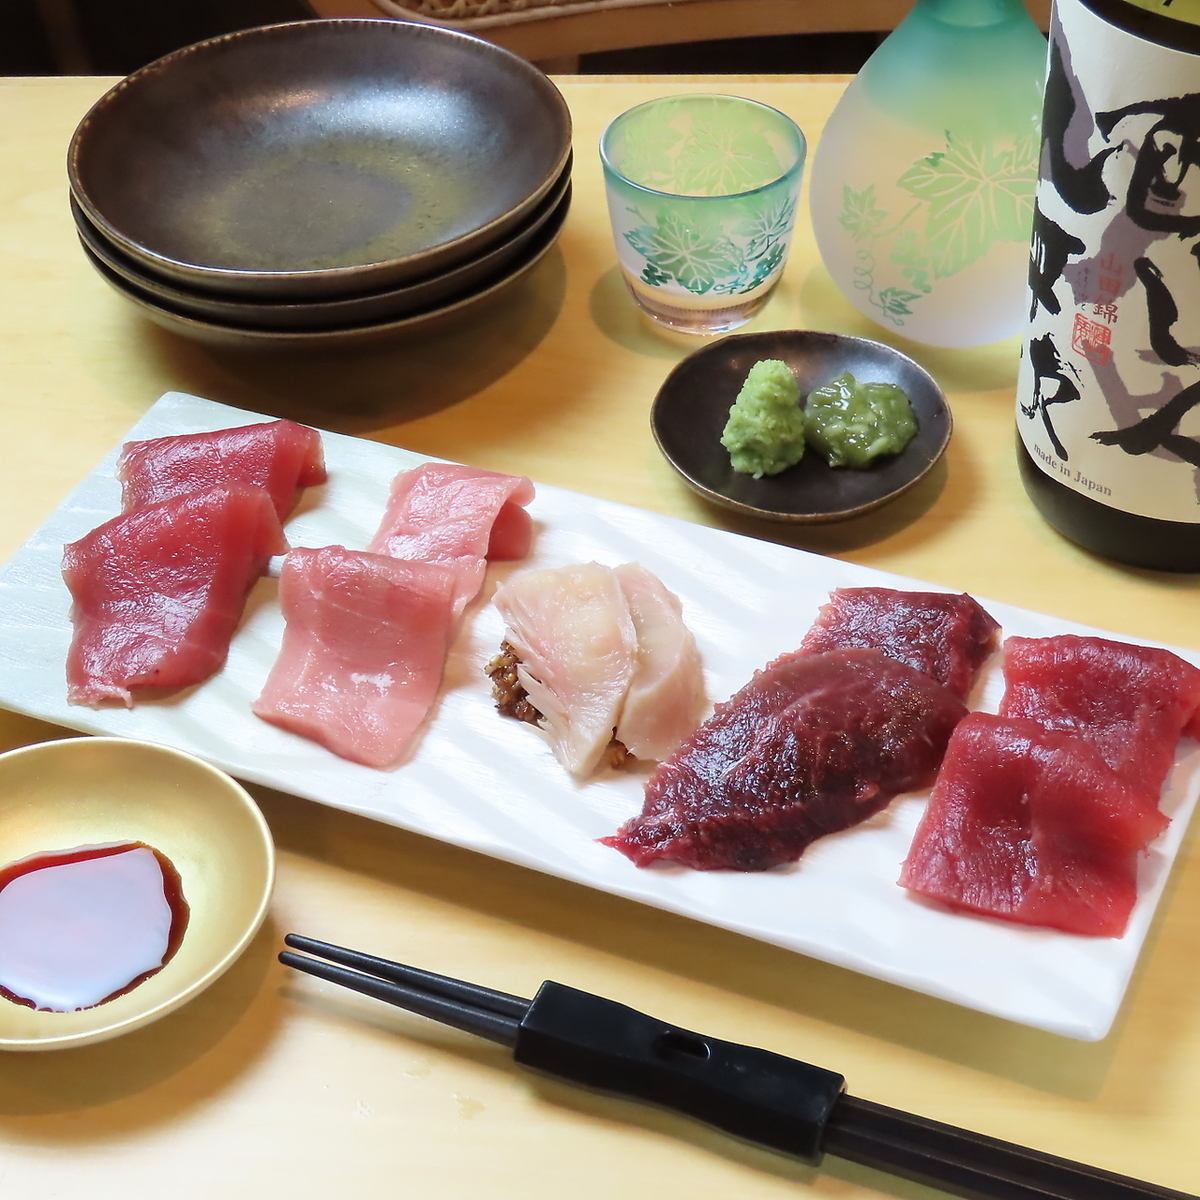 A tuna specialty store ◎ We offer a variety of tuna dishes such as sashimi and yakiniku!